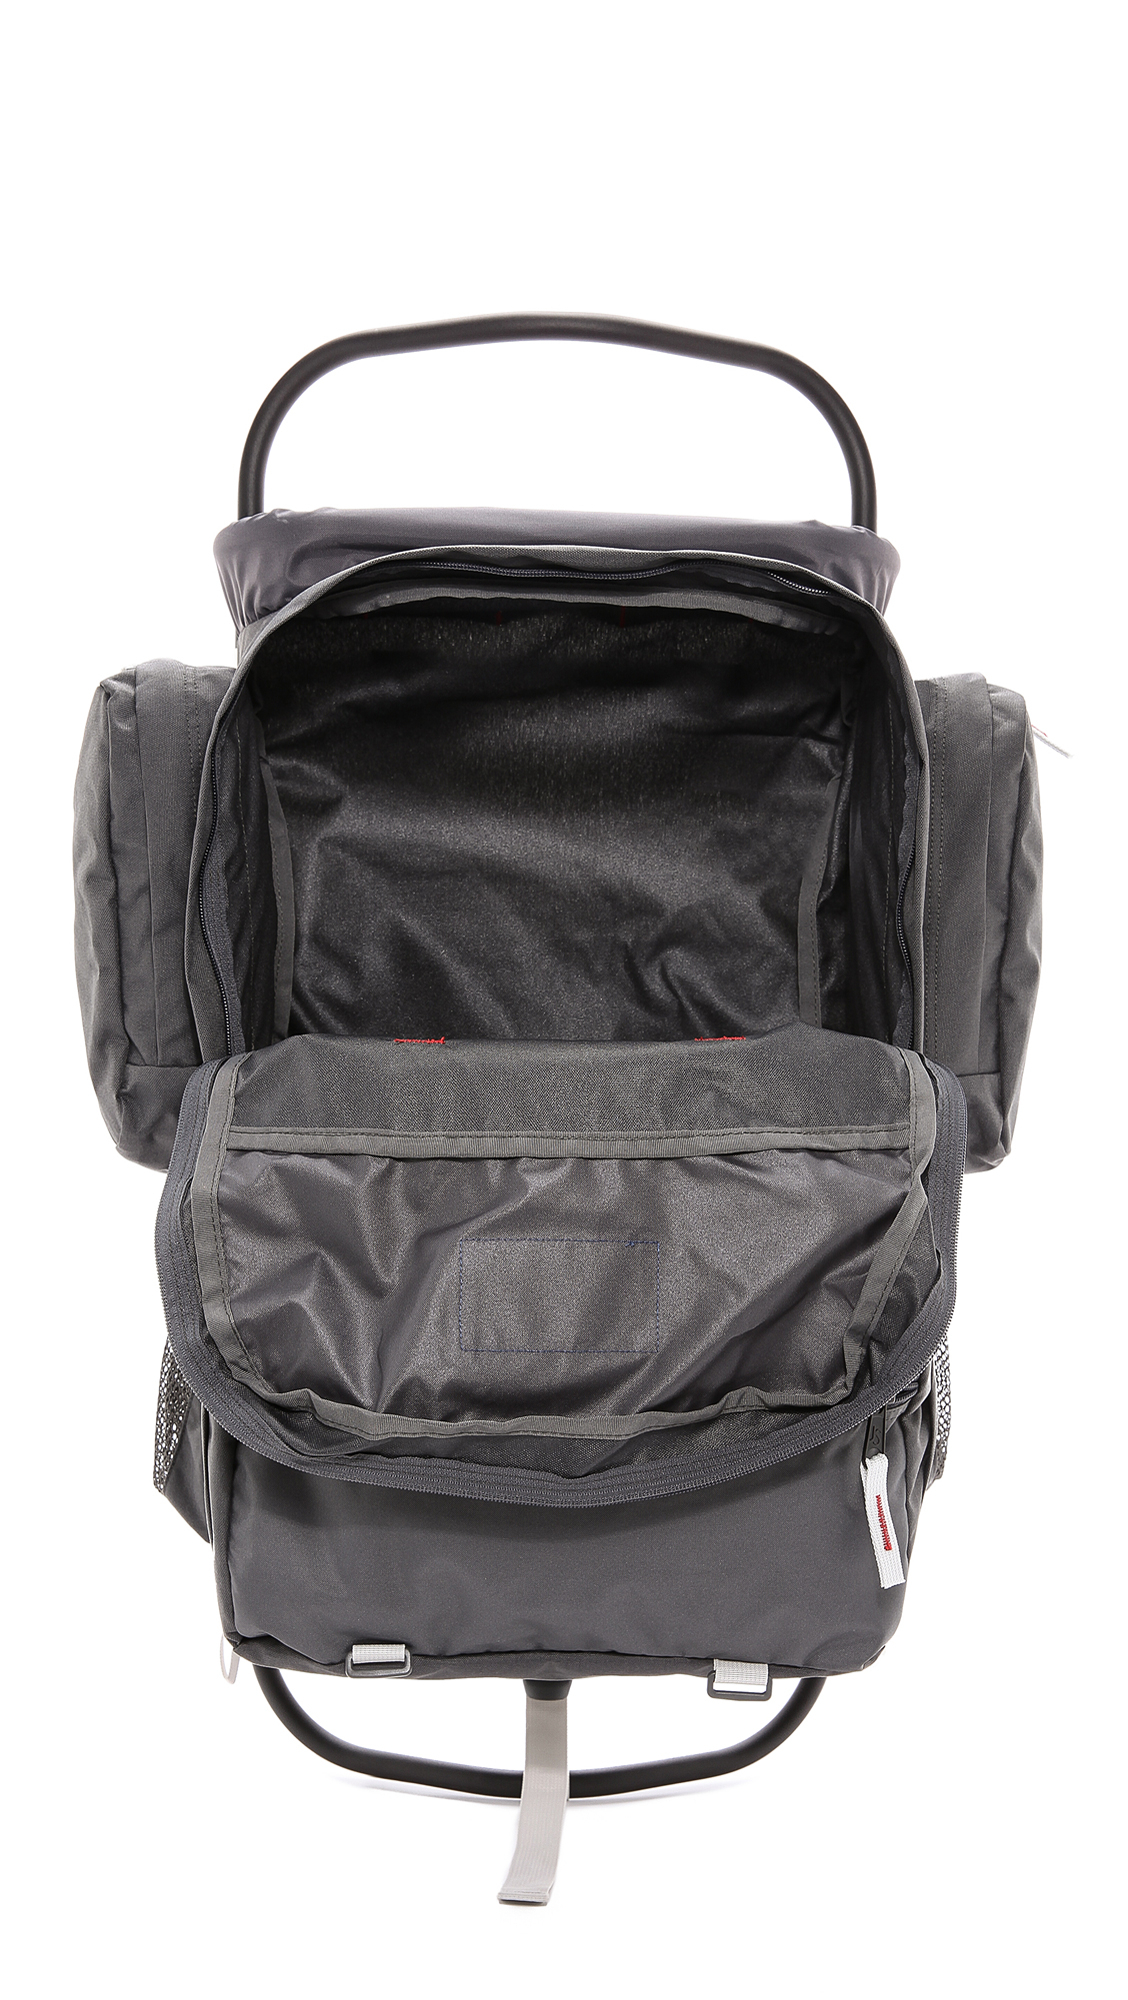 Lyst - Jansport Scout Backpack in Gray for Men